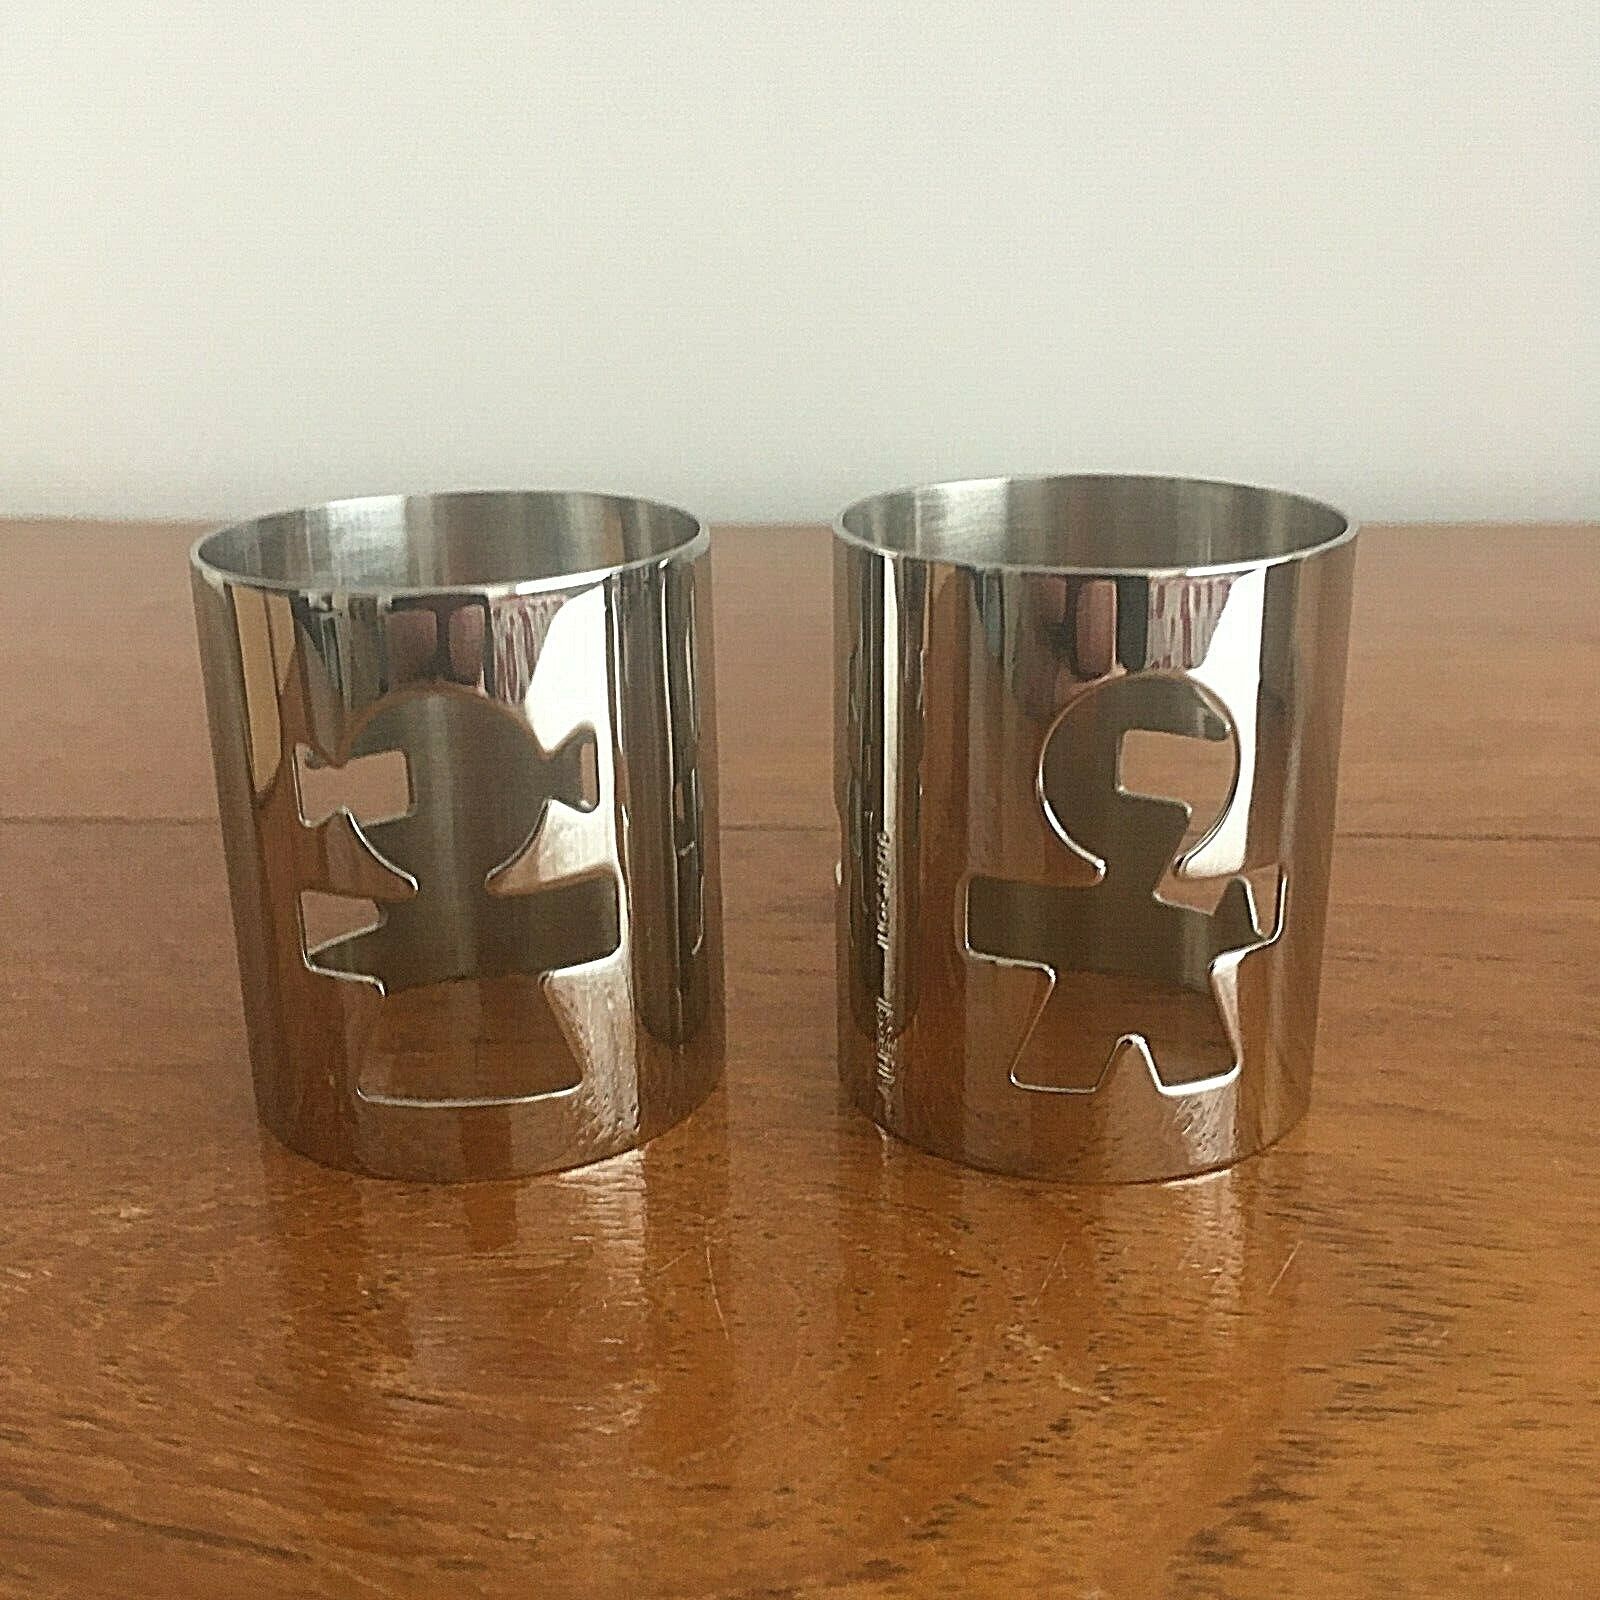 ALESSI Napkin Rings - Woman and Man. Made in Italy.